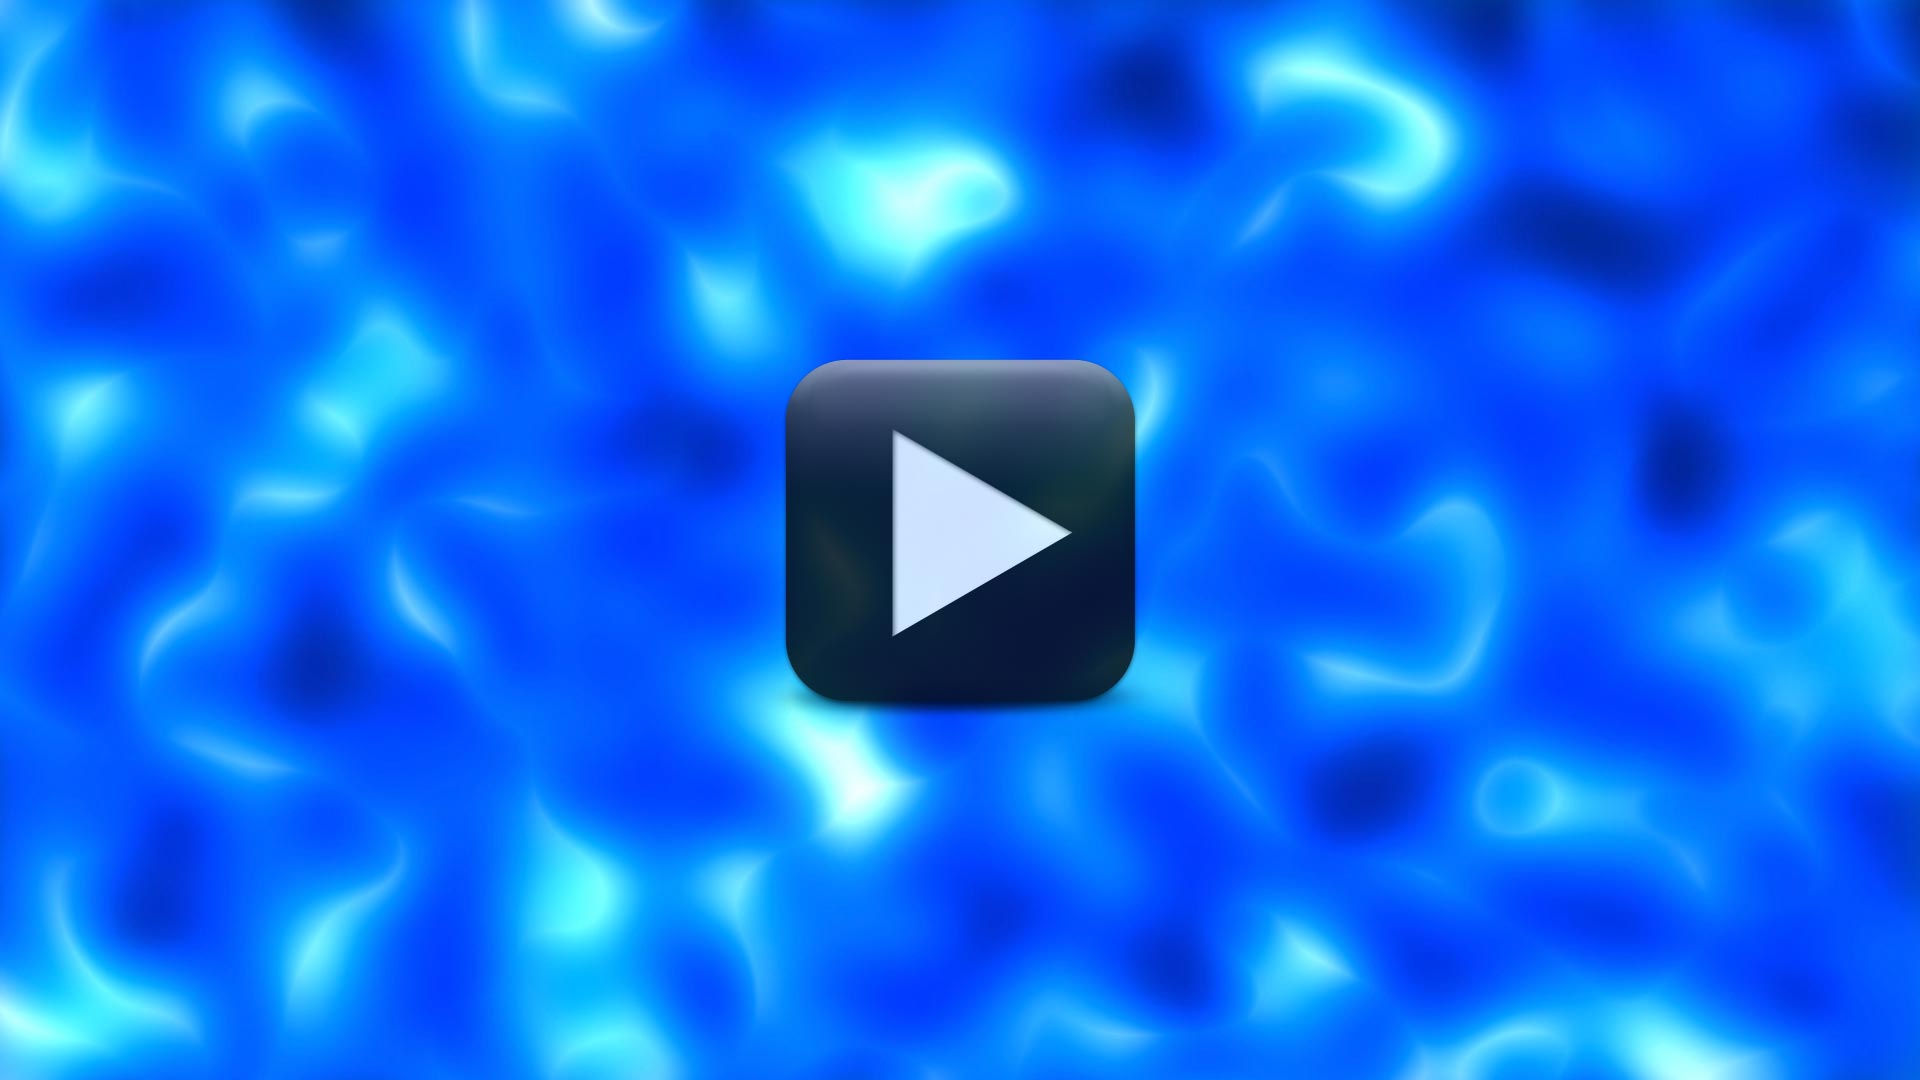 Medical Background Cells Animation Video-Free Download | All Design Creative